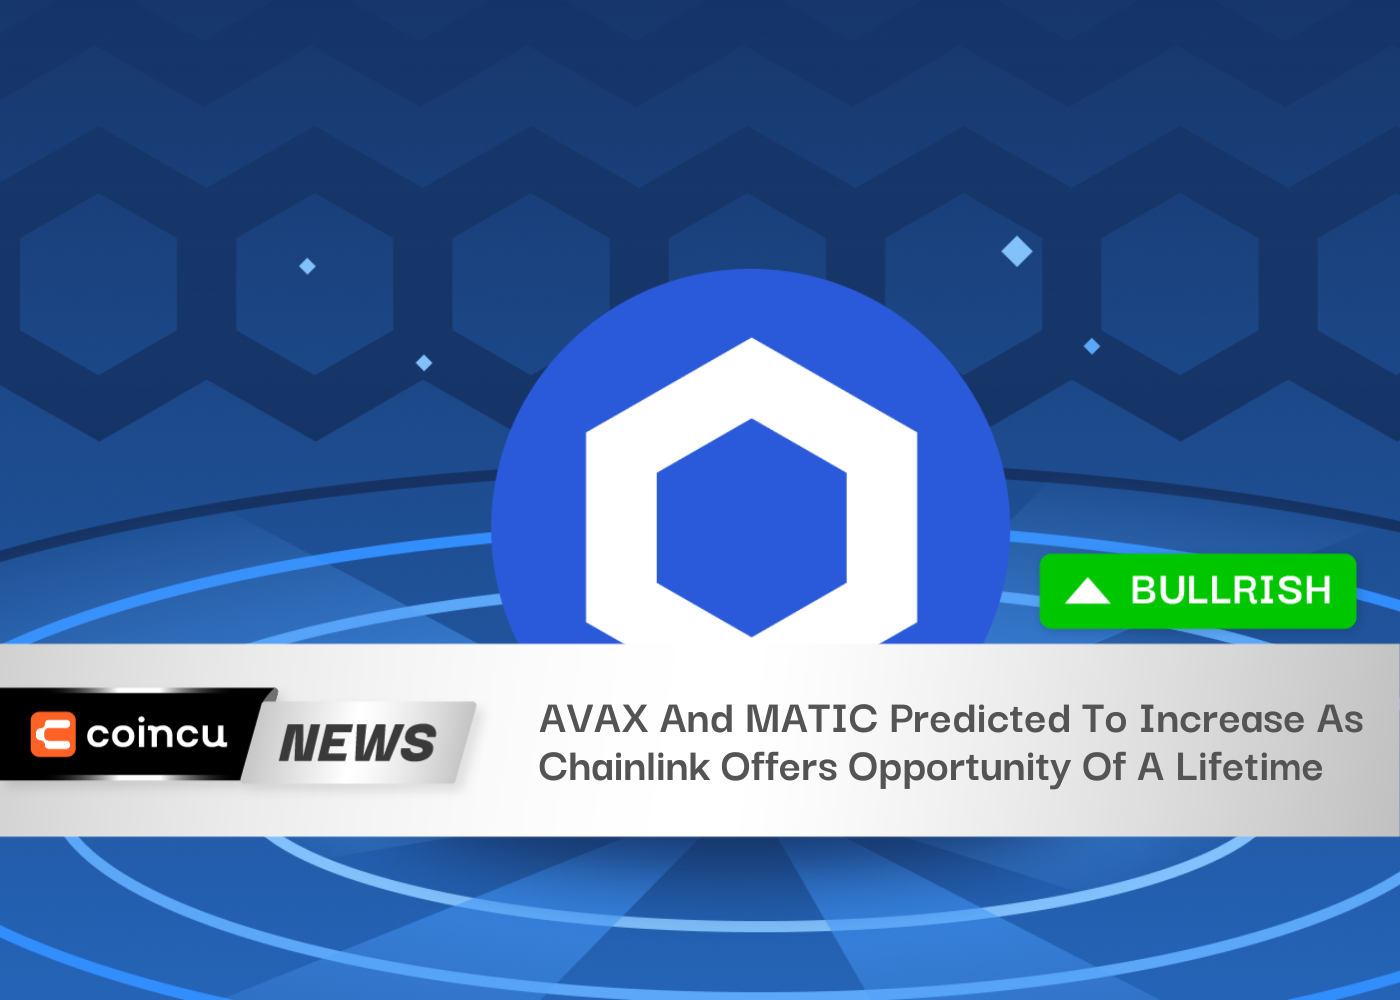 AVAX And MATIC Predicted To Increase As Chainlink Offers Opportunity Of A Lifetime